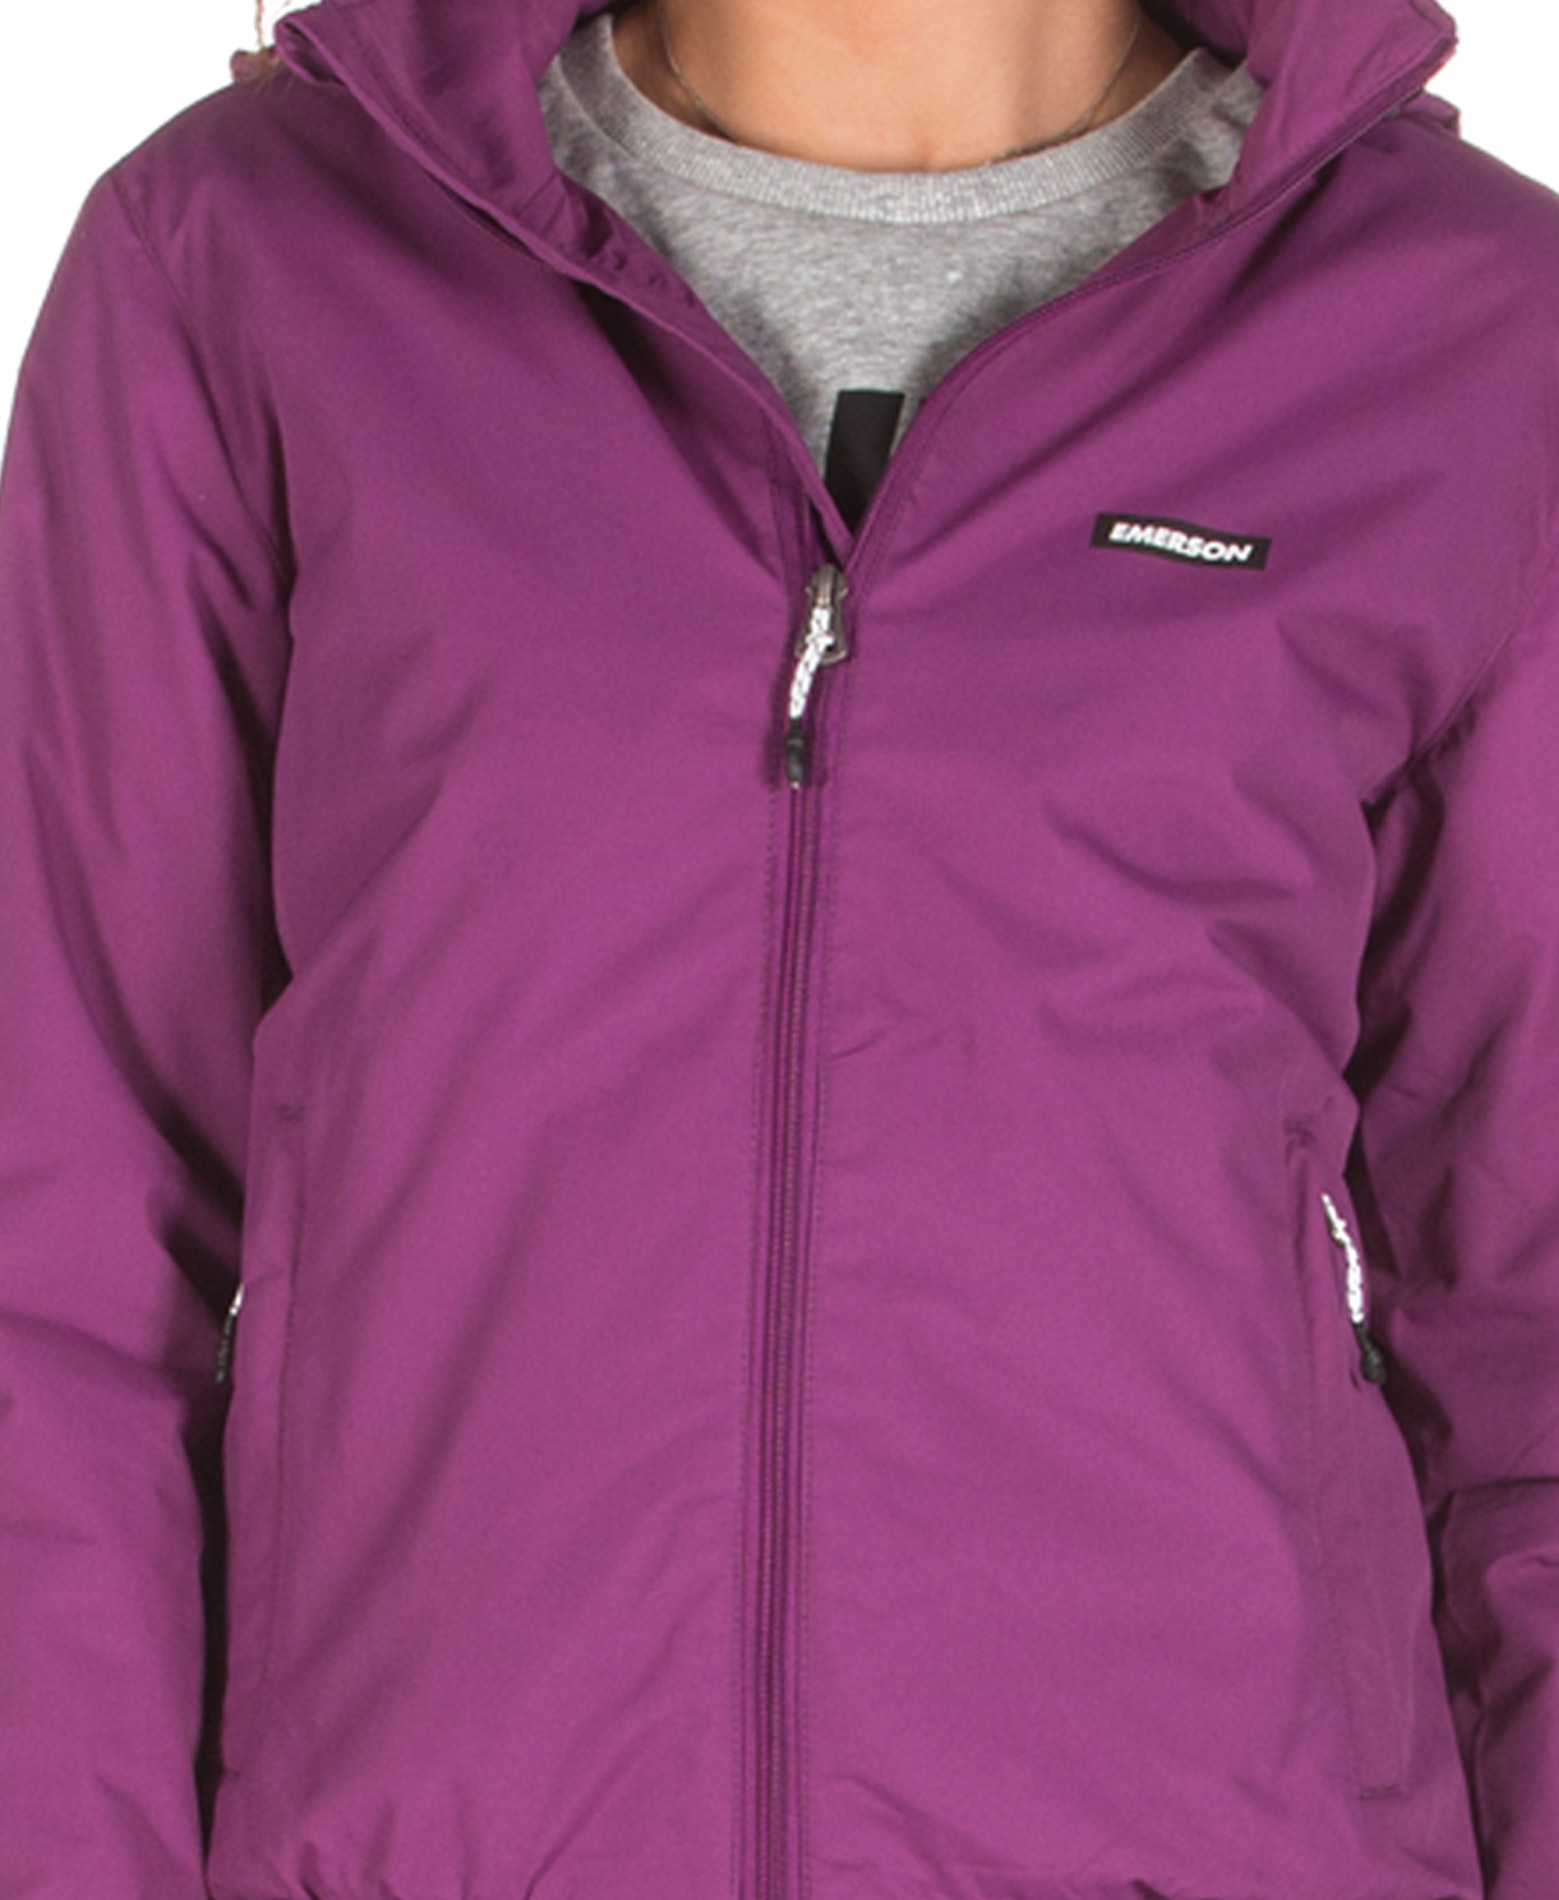 EMERSON ROLL-IN HOODED BOMBER JACKET 192.EW10.88-DOBBY VIOLET Μωβ